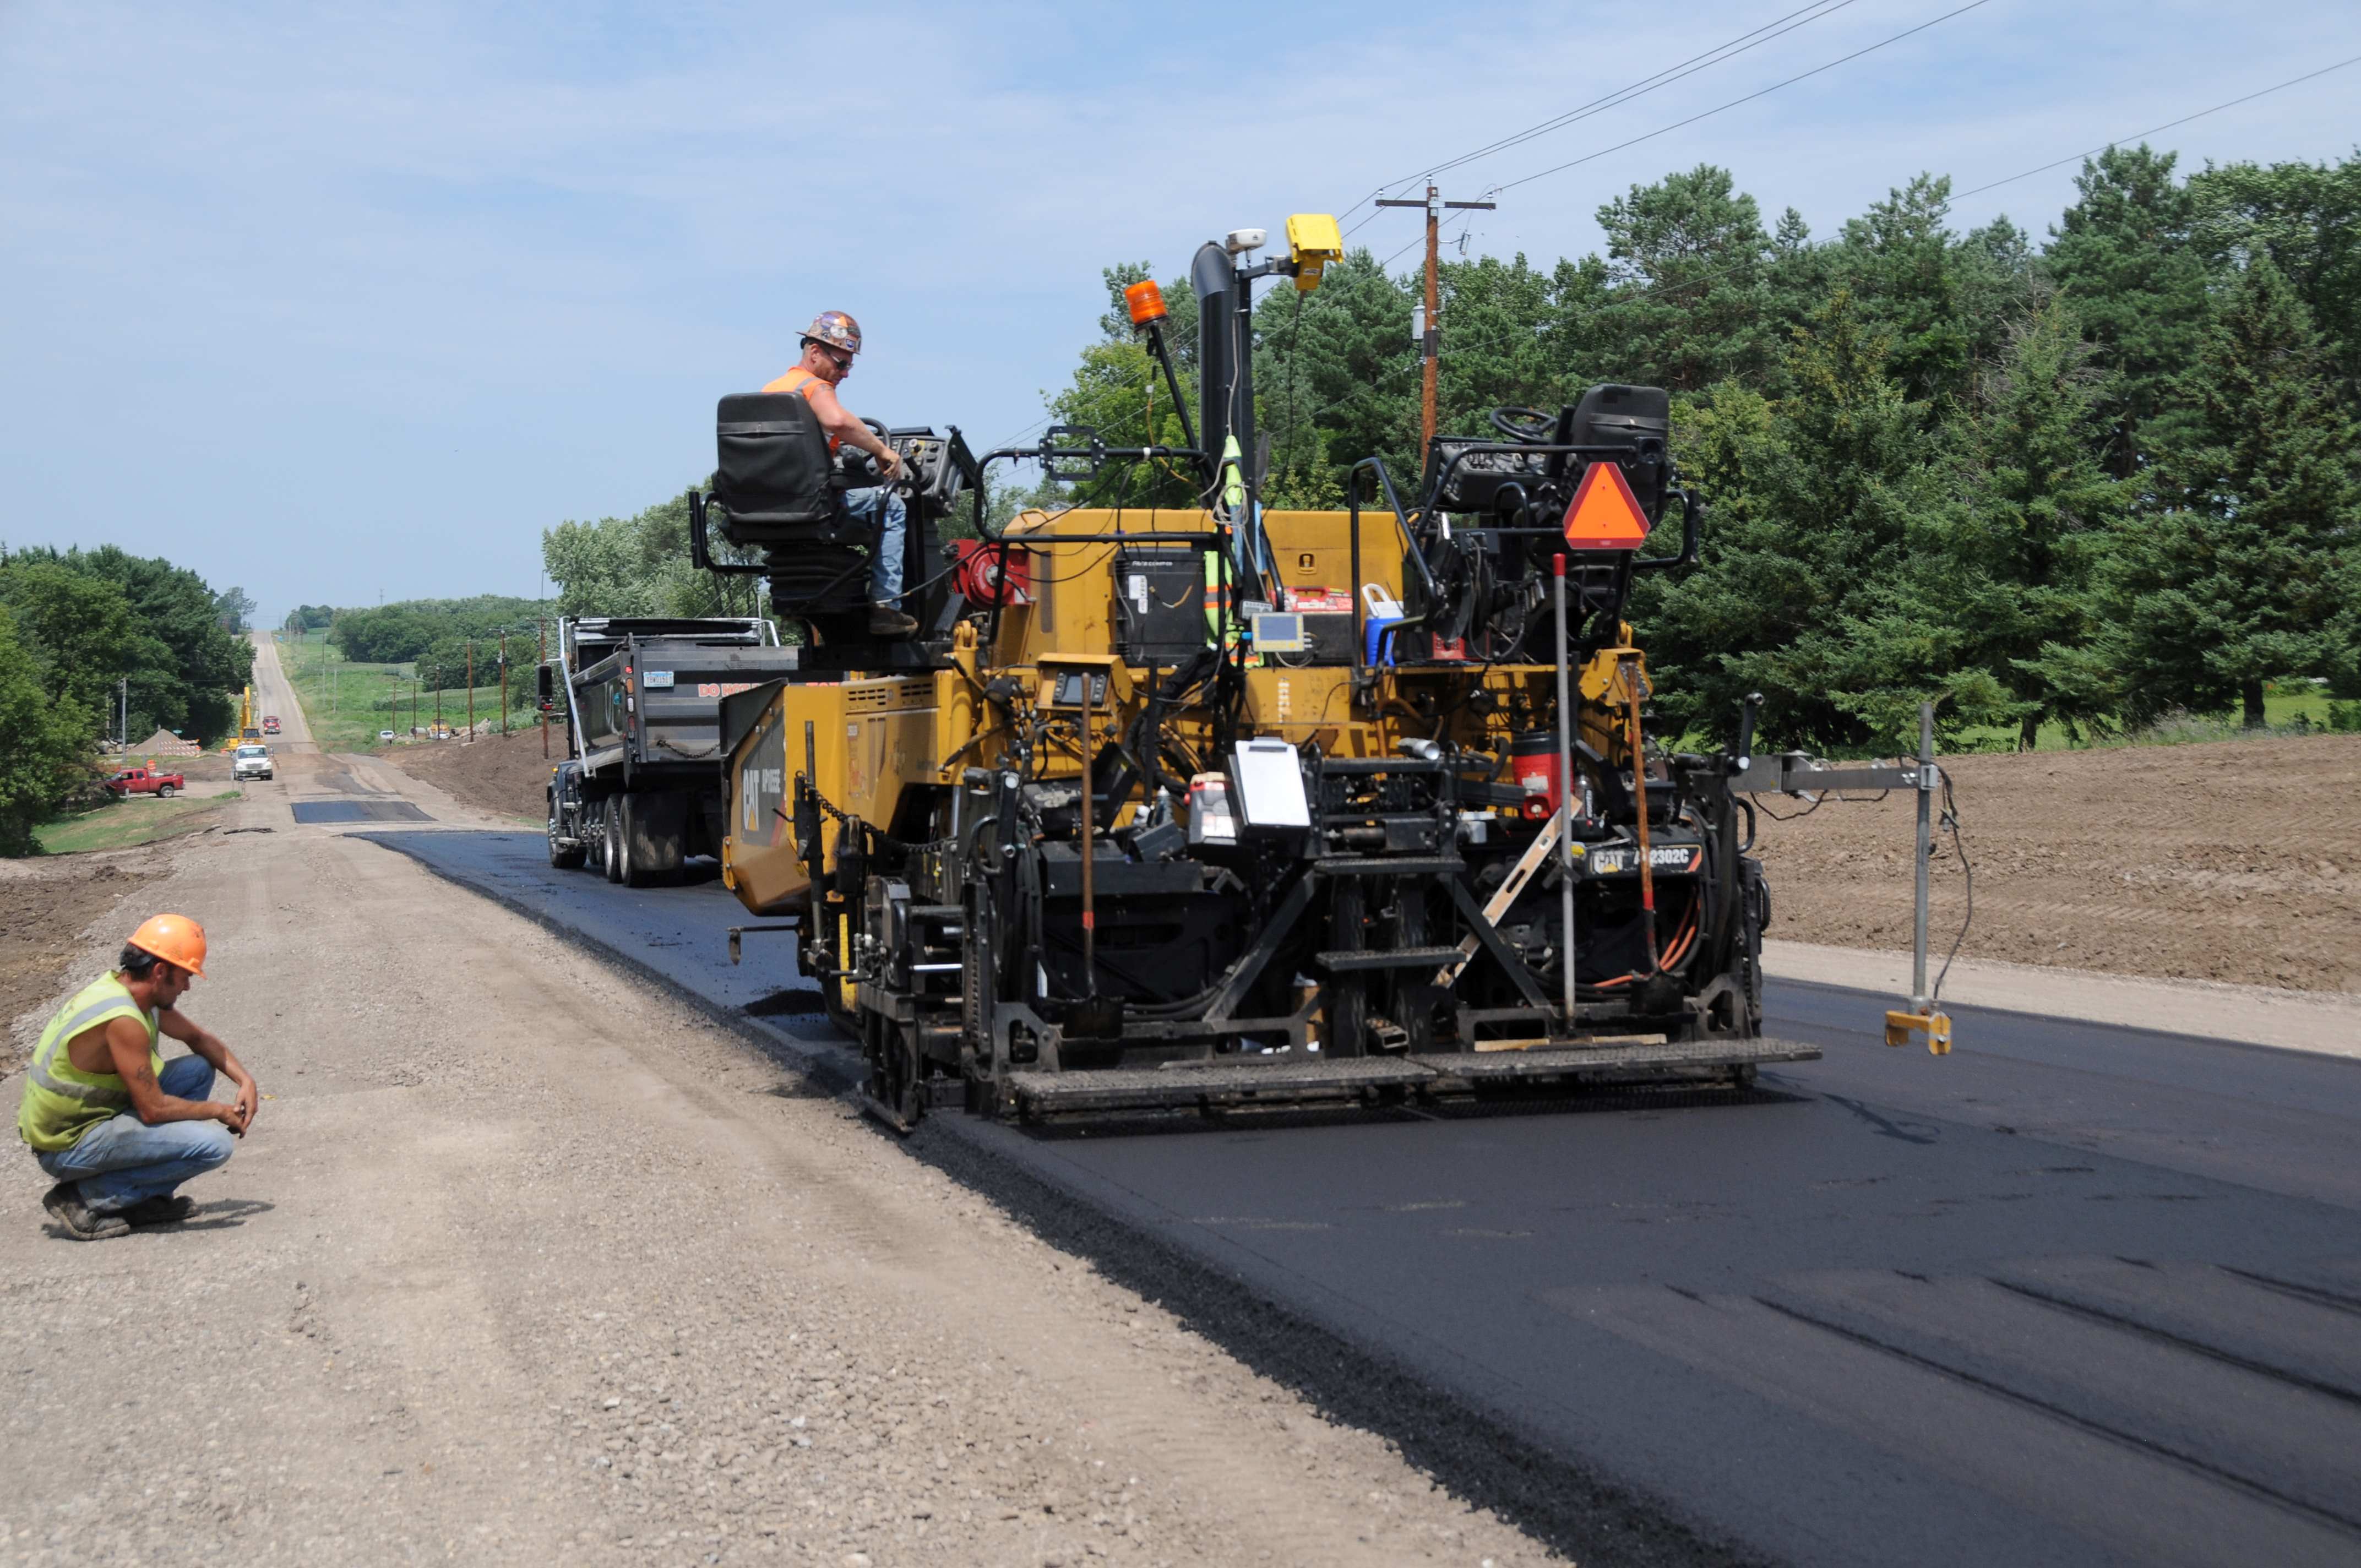 New Project: Improving and Developing Pavement Design Inputs and
Performance Functions for Cold Recycled Pavement Layers